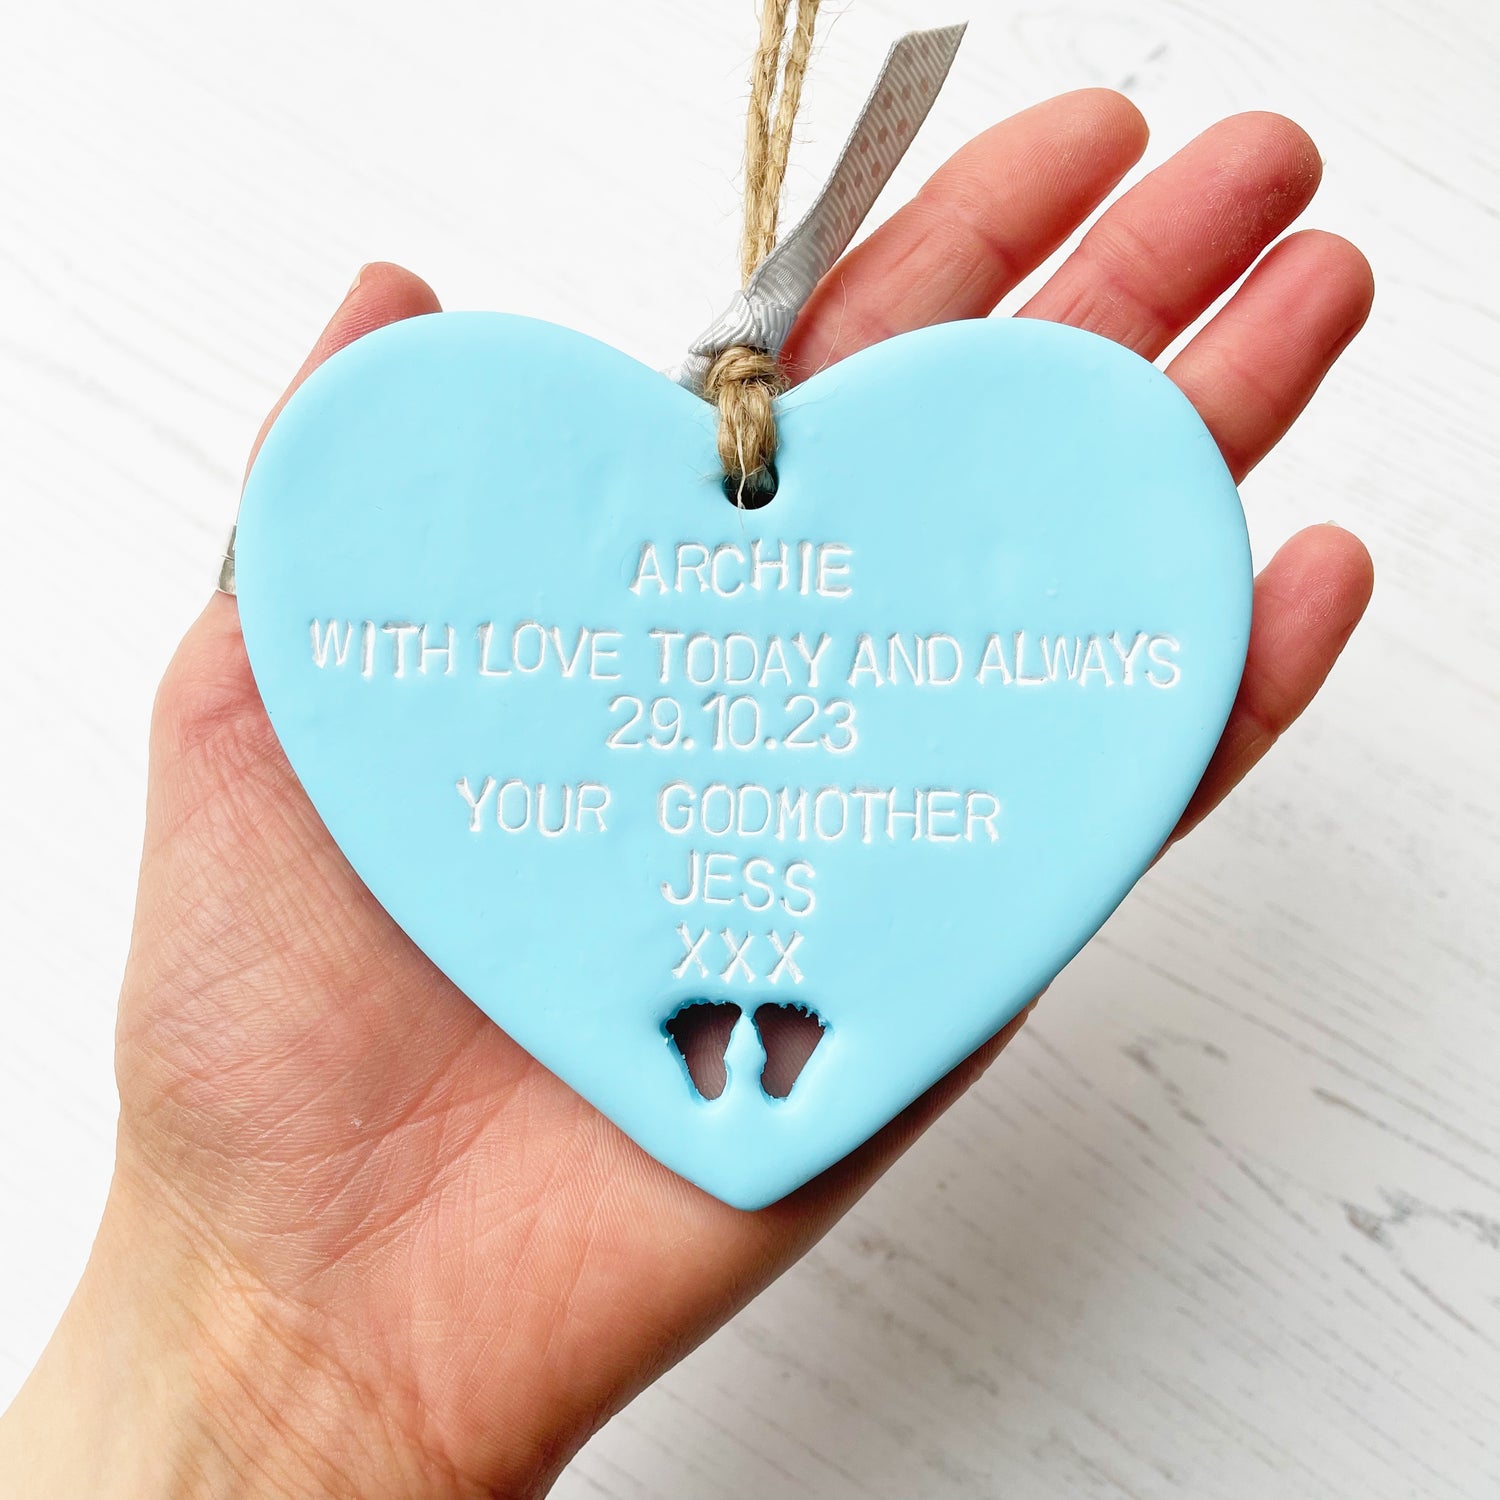 Personalised Christening gift, pastel blue clay hanging heart with baby feet cut out of the bottom, the heart is personalised with ARCHIE WITH LOVE TODAY AND ALWAYS 29.10.23 YOUR GODMOTHER JESS XXX